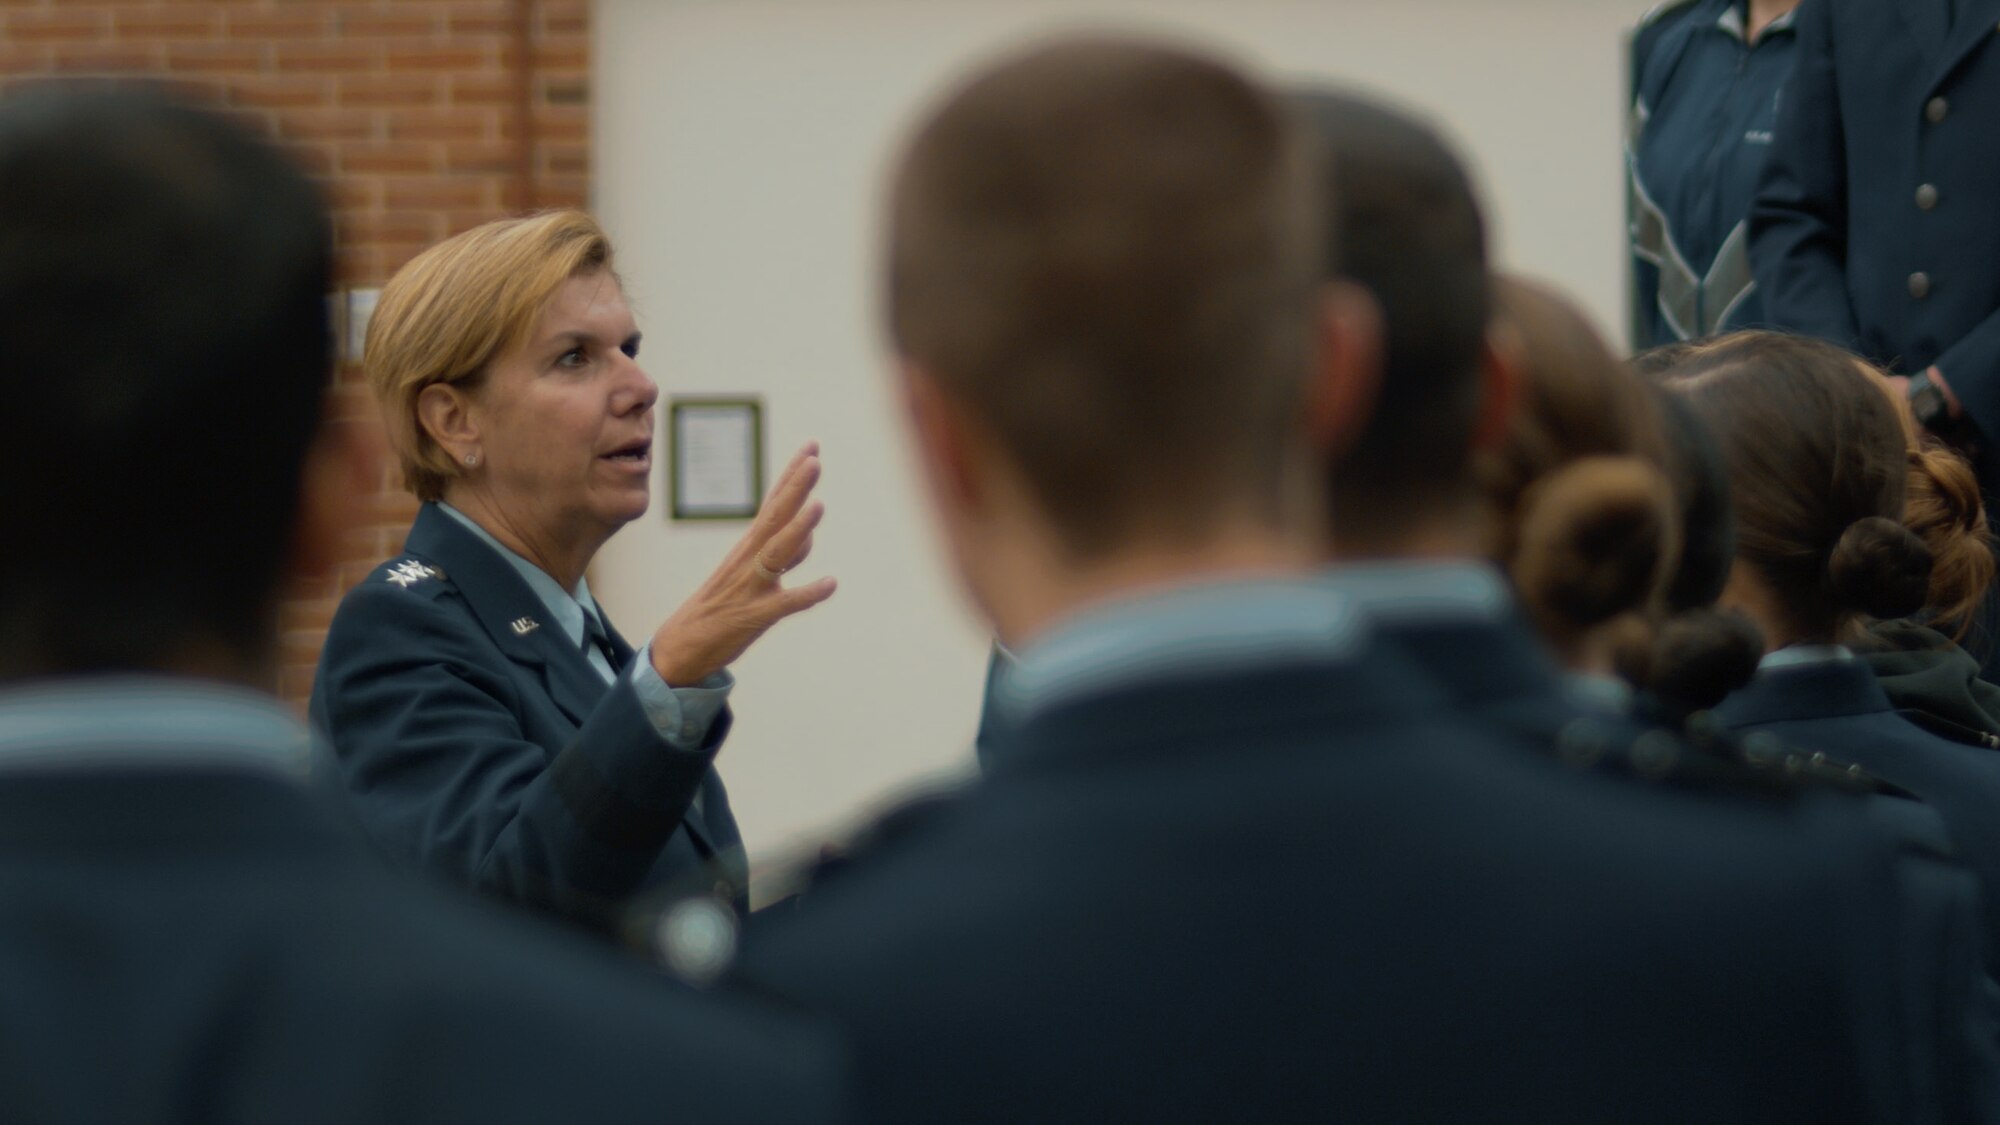 Retired Gen. Lori Robinson speaks with cadets at Air Force ROTC Detachment 475, University of New Hampshire, Nov. 12, 2019. Robinson was at her alma mater and former detachment to receive the Air Force ROTC Distinguished Alumni Award, presented by the commander of Headquarters AFROTC. Her last assignment before retiring in July 2018 after serving 37 years was as commander United States Northern Command and North American Aerospace Defense Command. (Photo by Billy Blankenship)